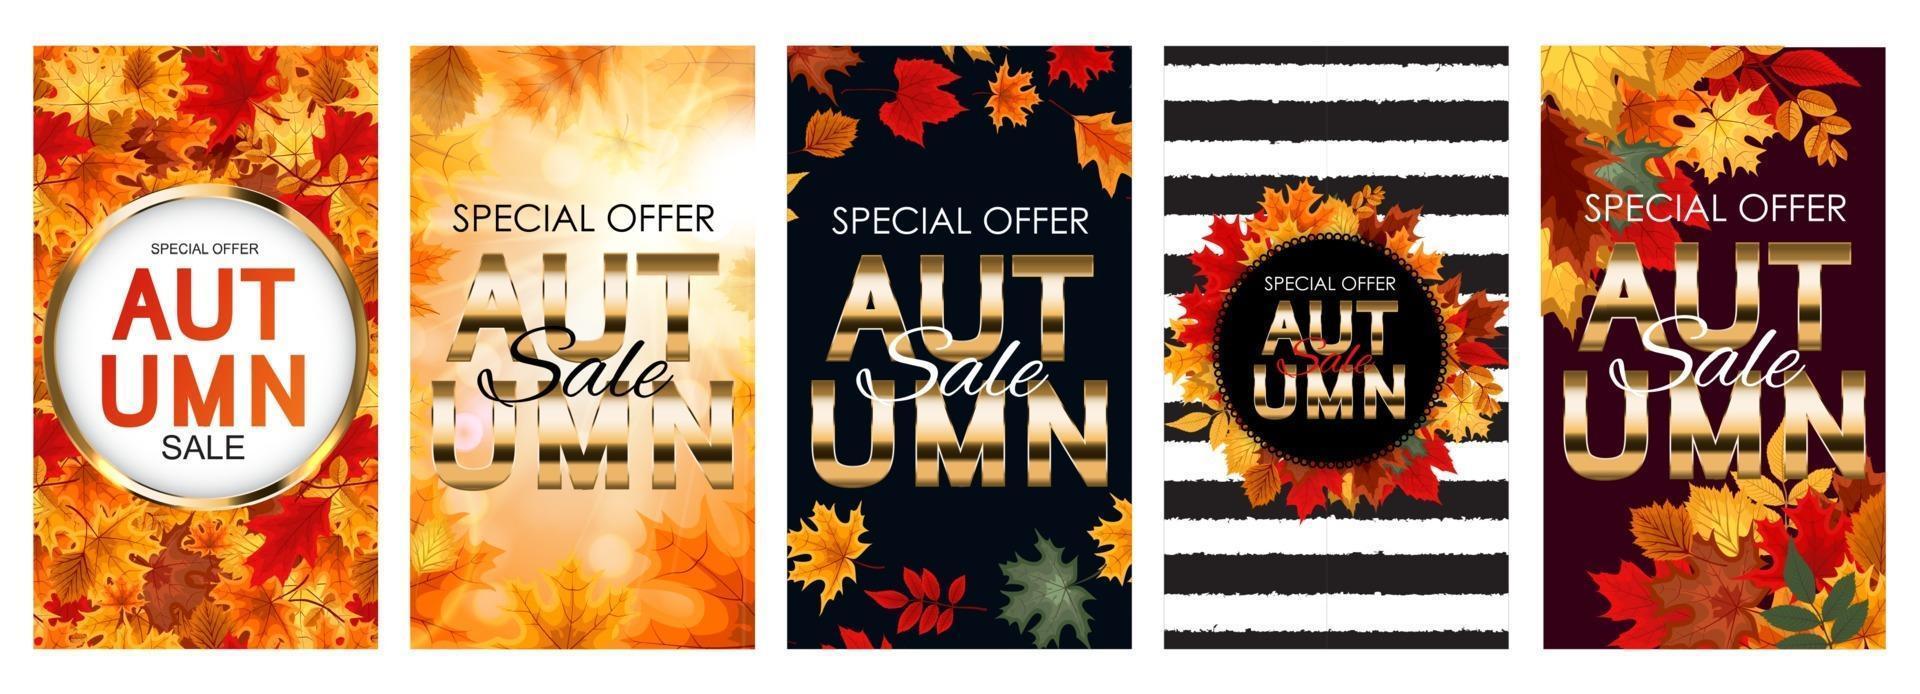 Abstract Autumn Sale Background with Falling Autumn Leaves vector